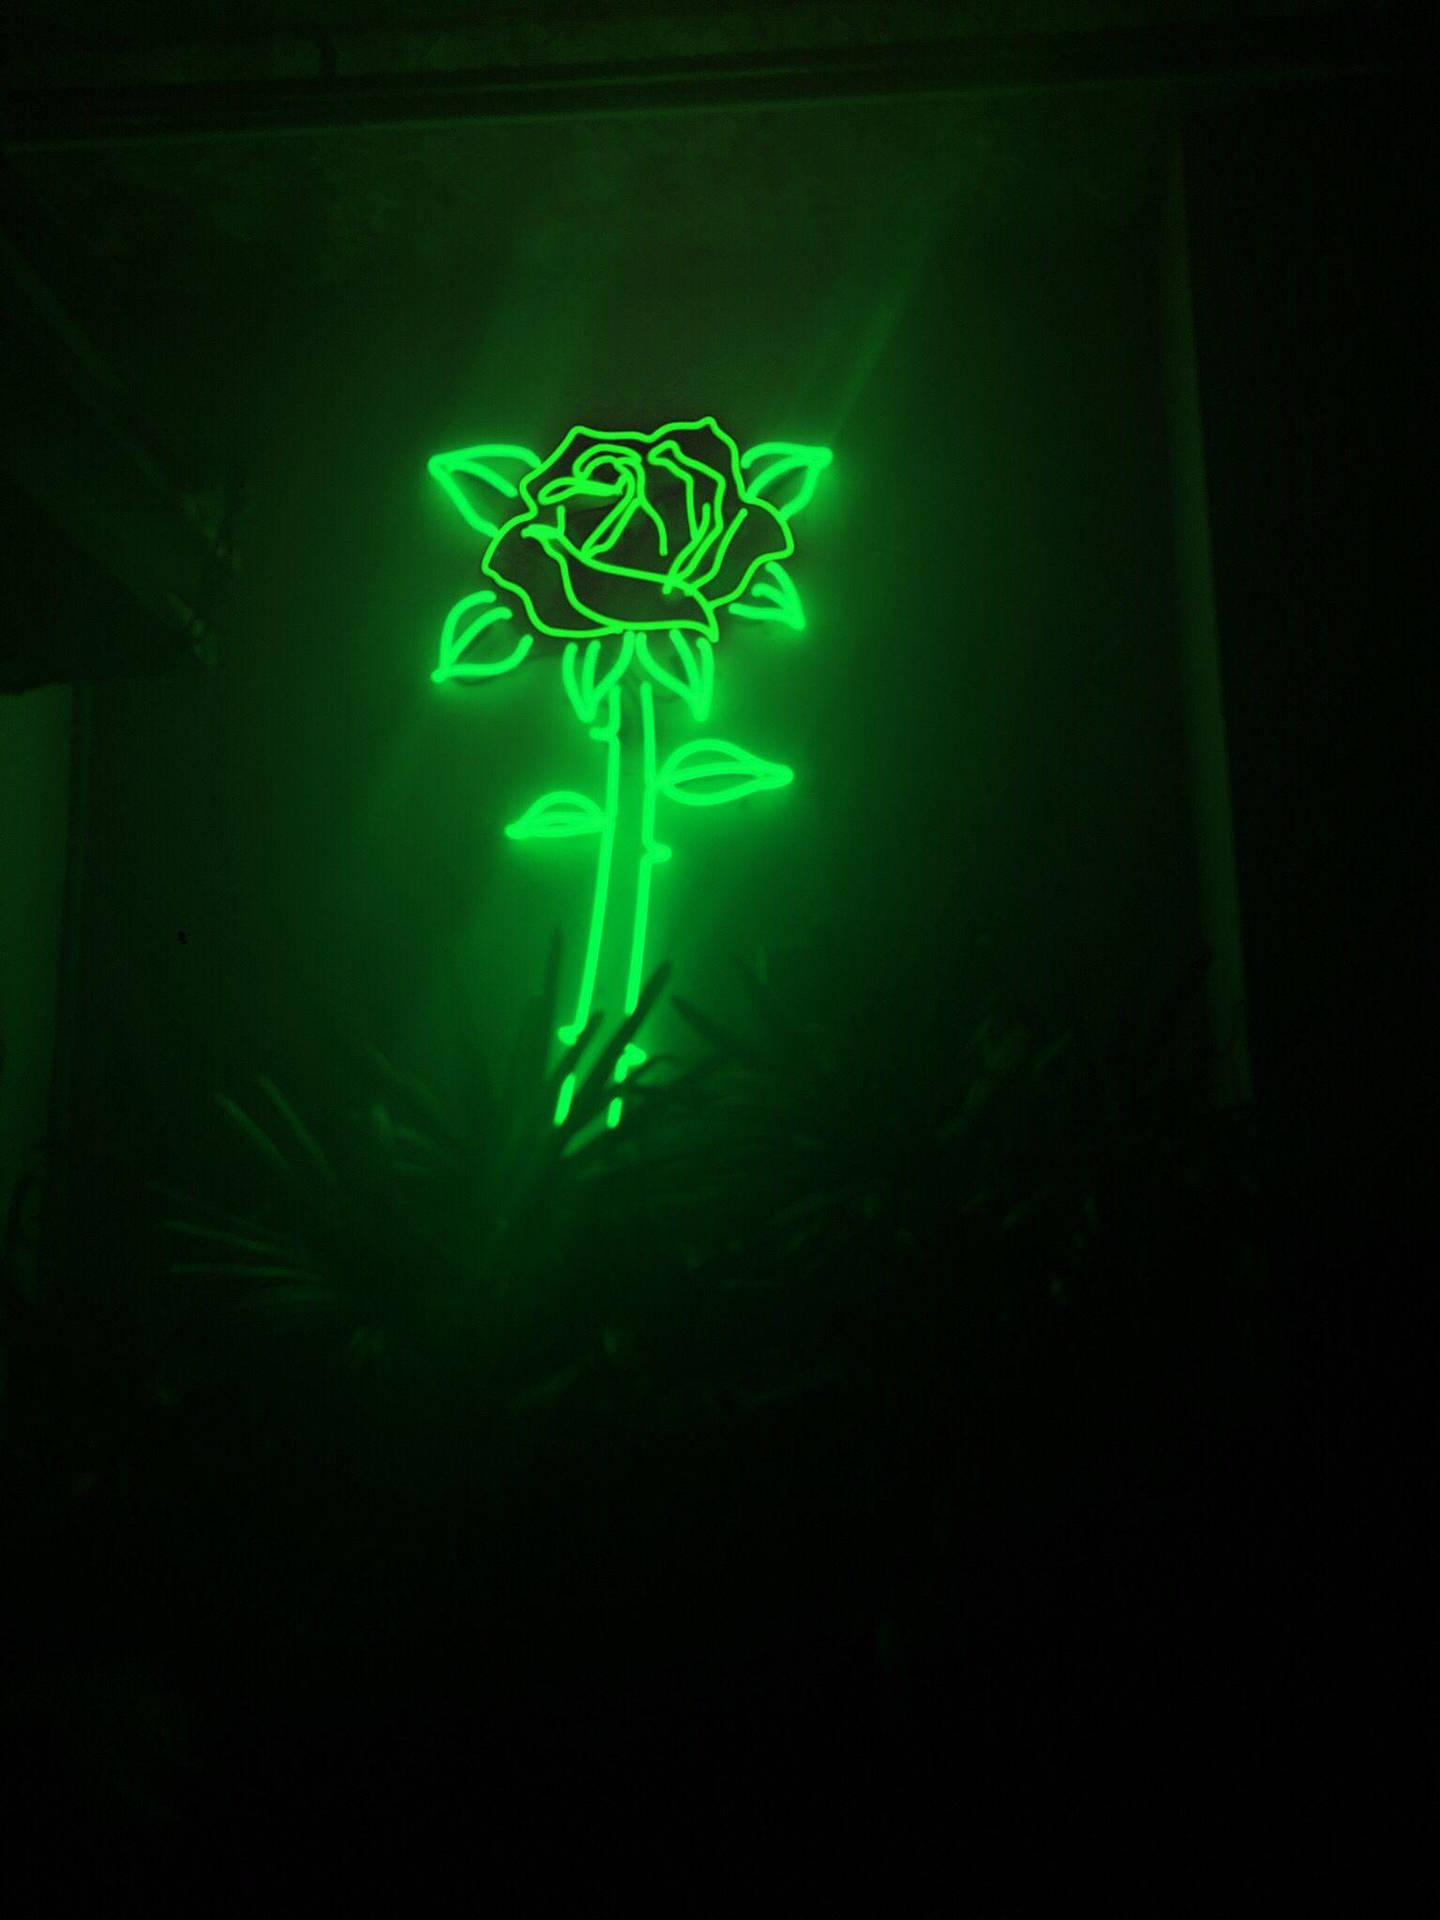 100+] Neon Green Aesthetic Pictures